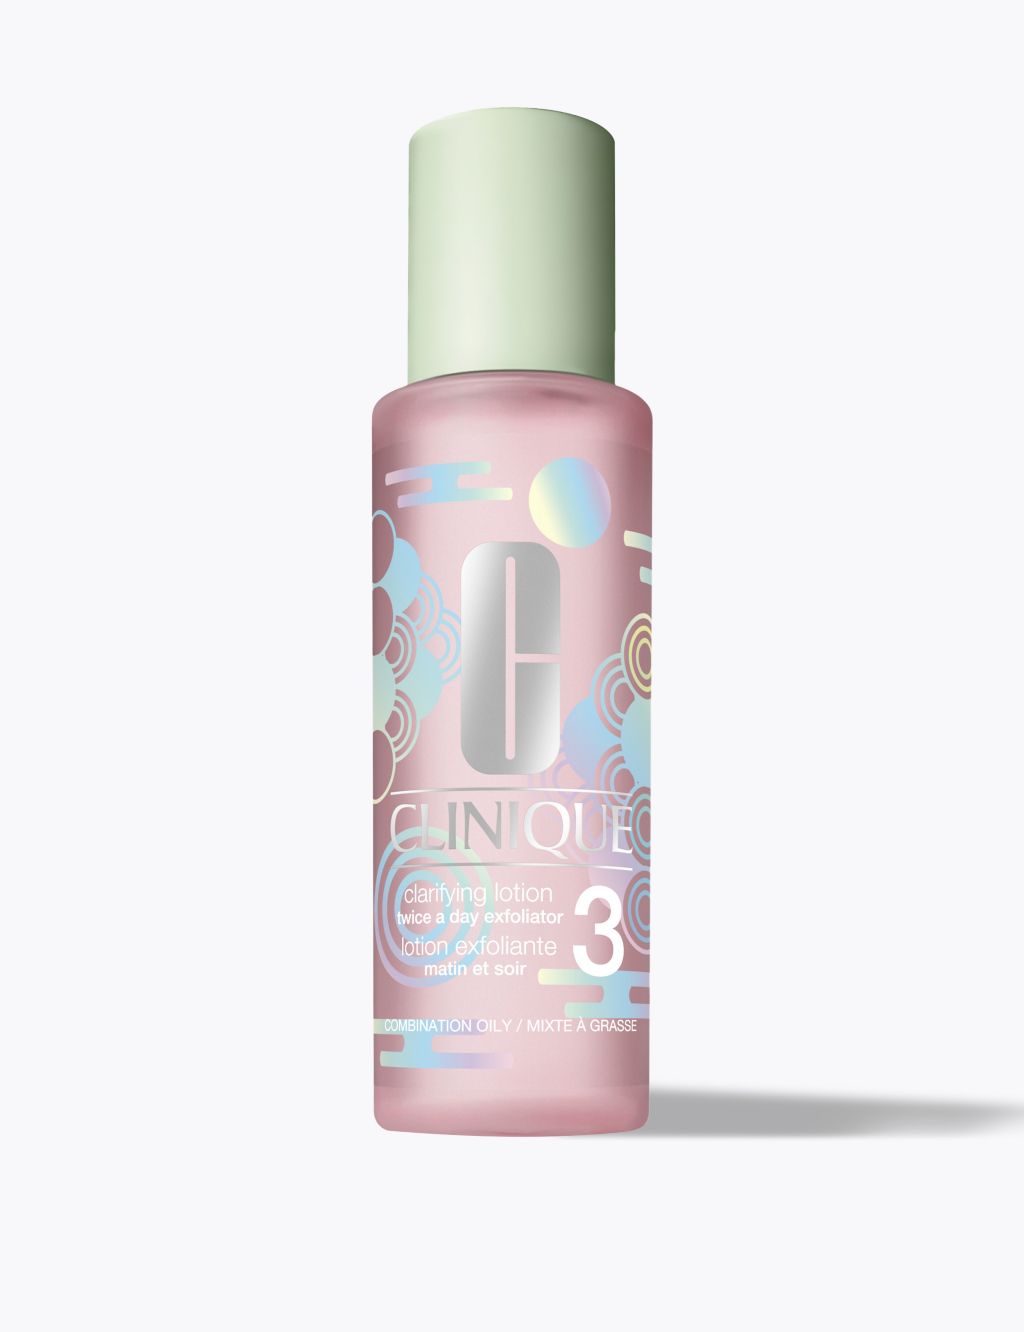 Limited Edition Clarifying Lotion 2 200ml